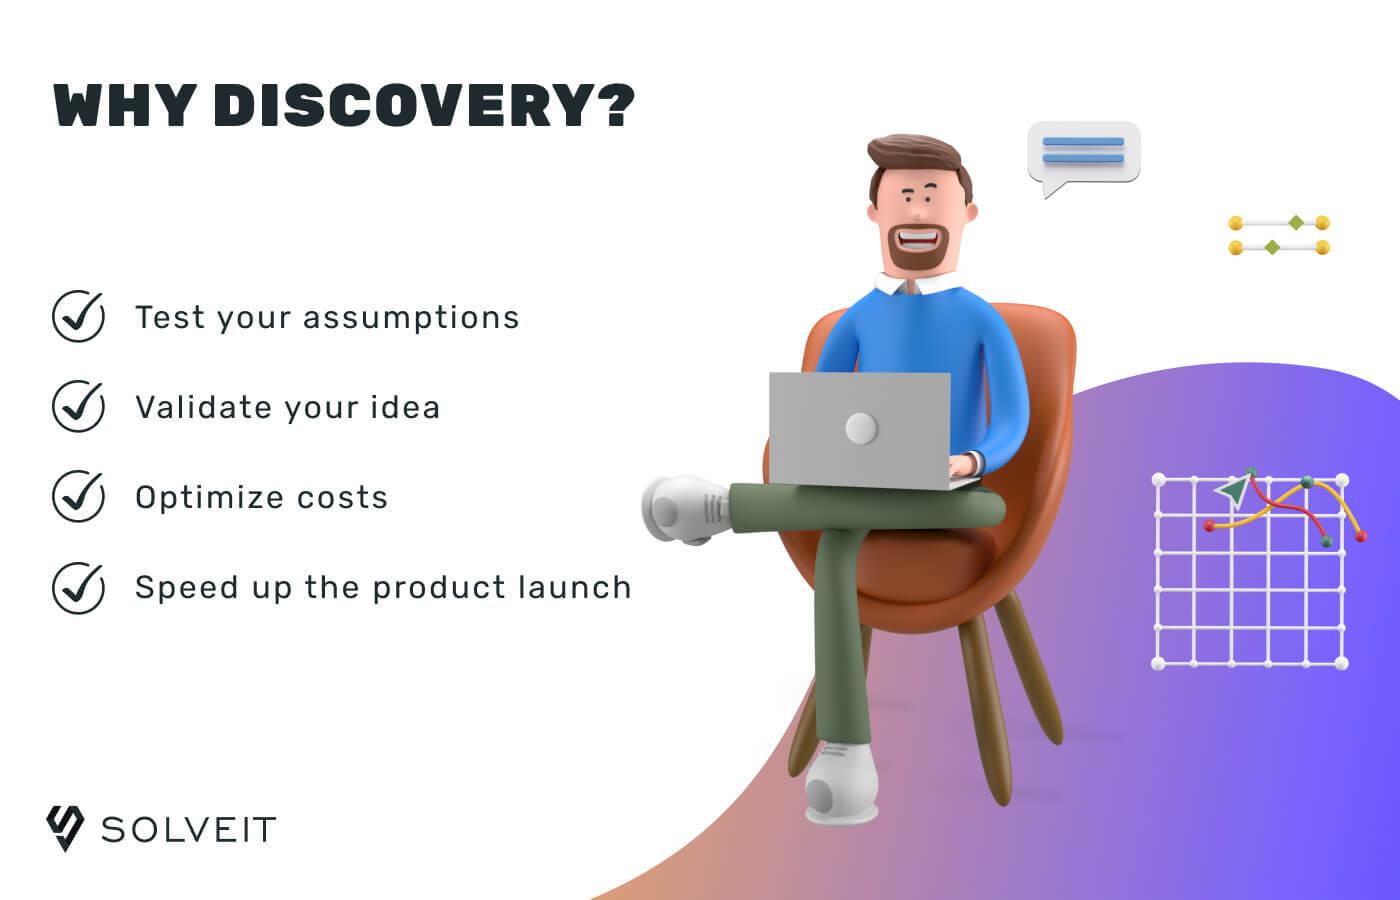 Discovery phase benefits